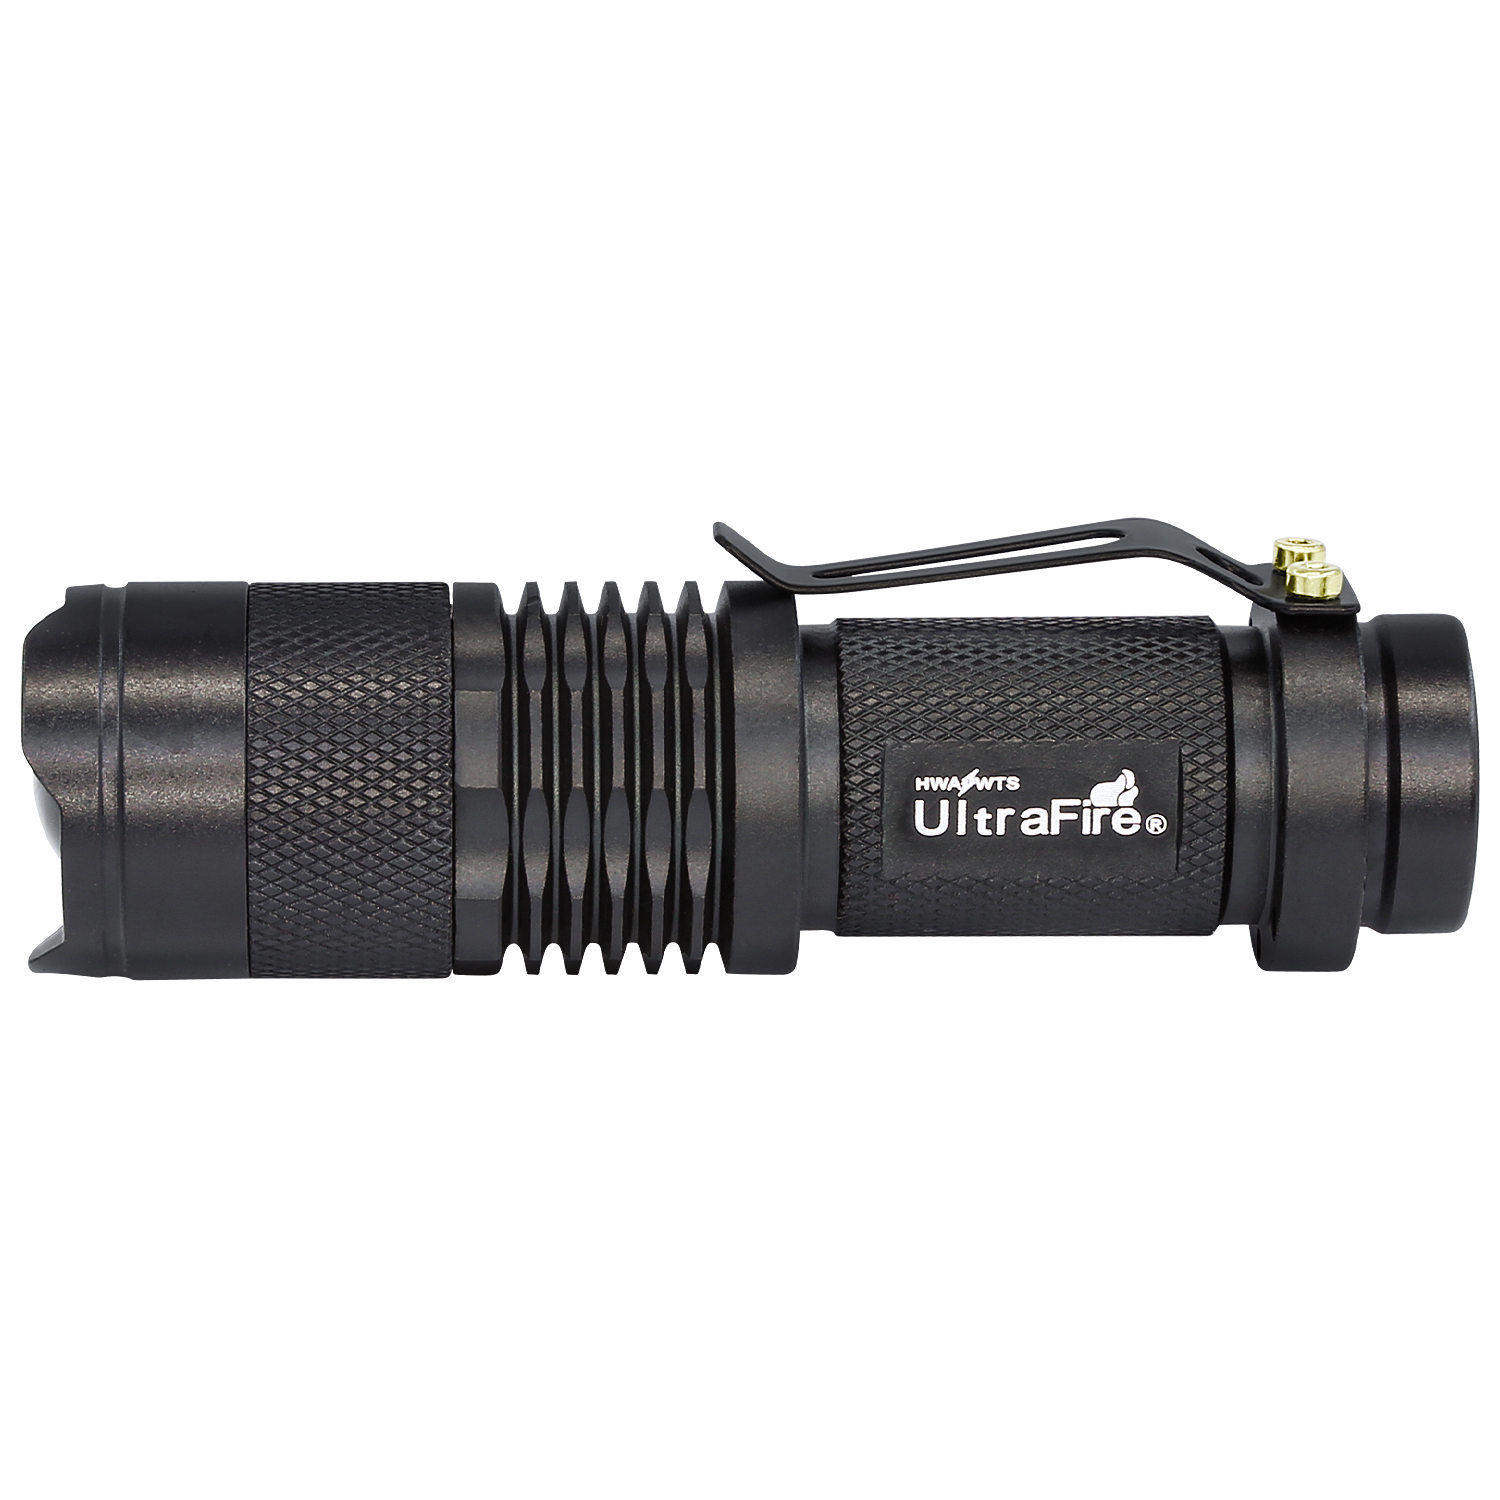 Aifire Best Hunting Flashlights 2022 Adjustable Rechargeable UV